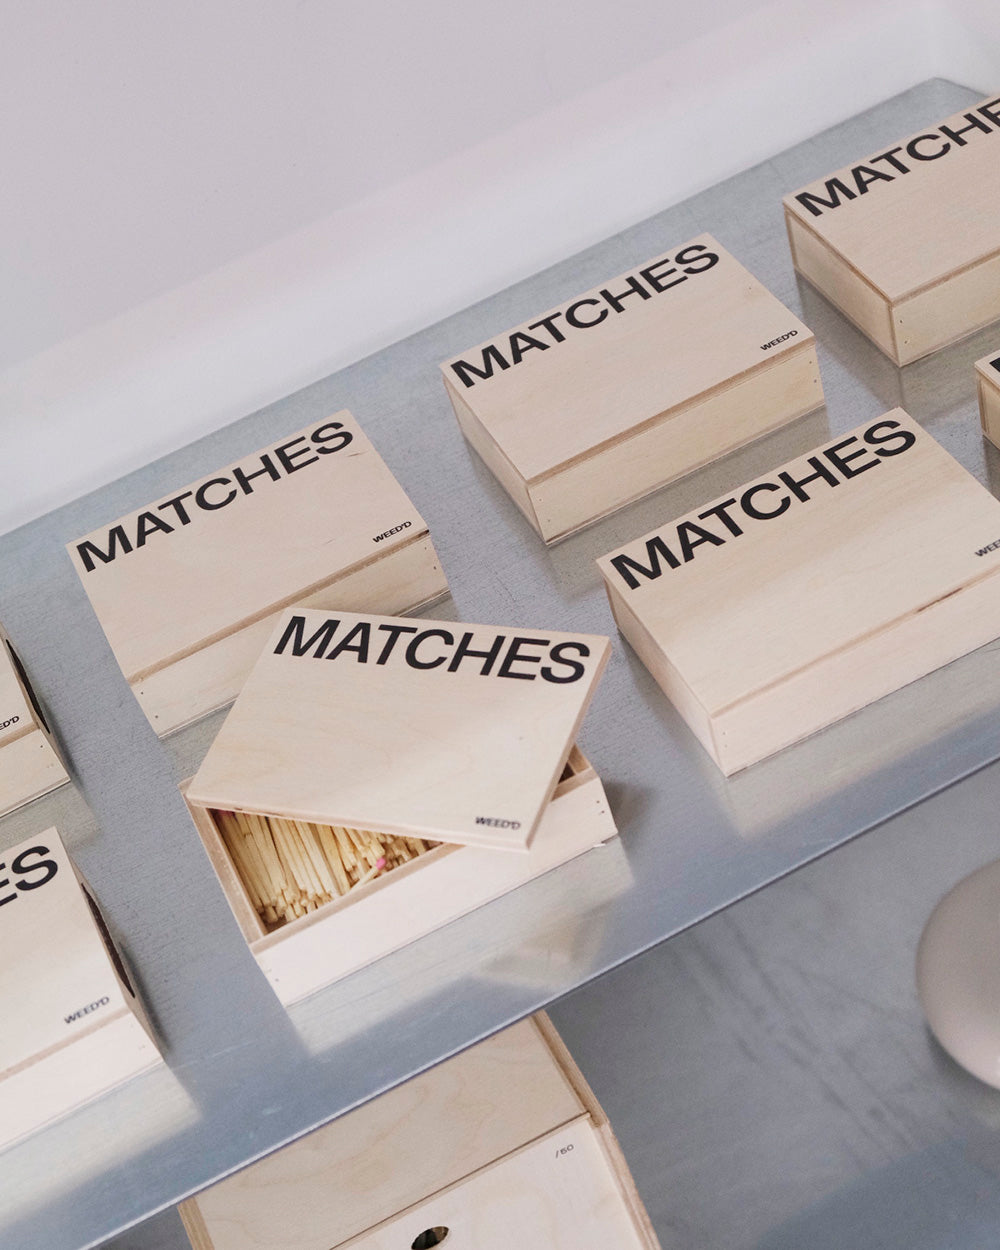 A BOX OF "MATCHES"